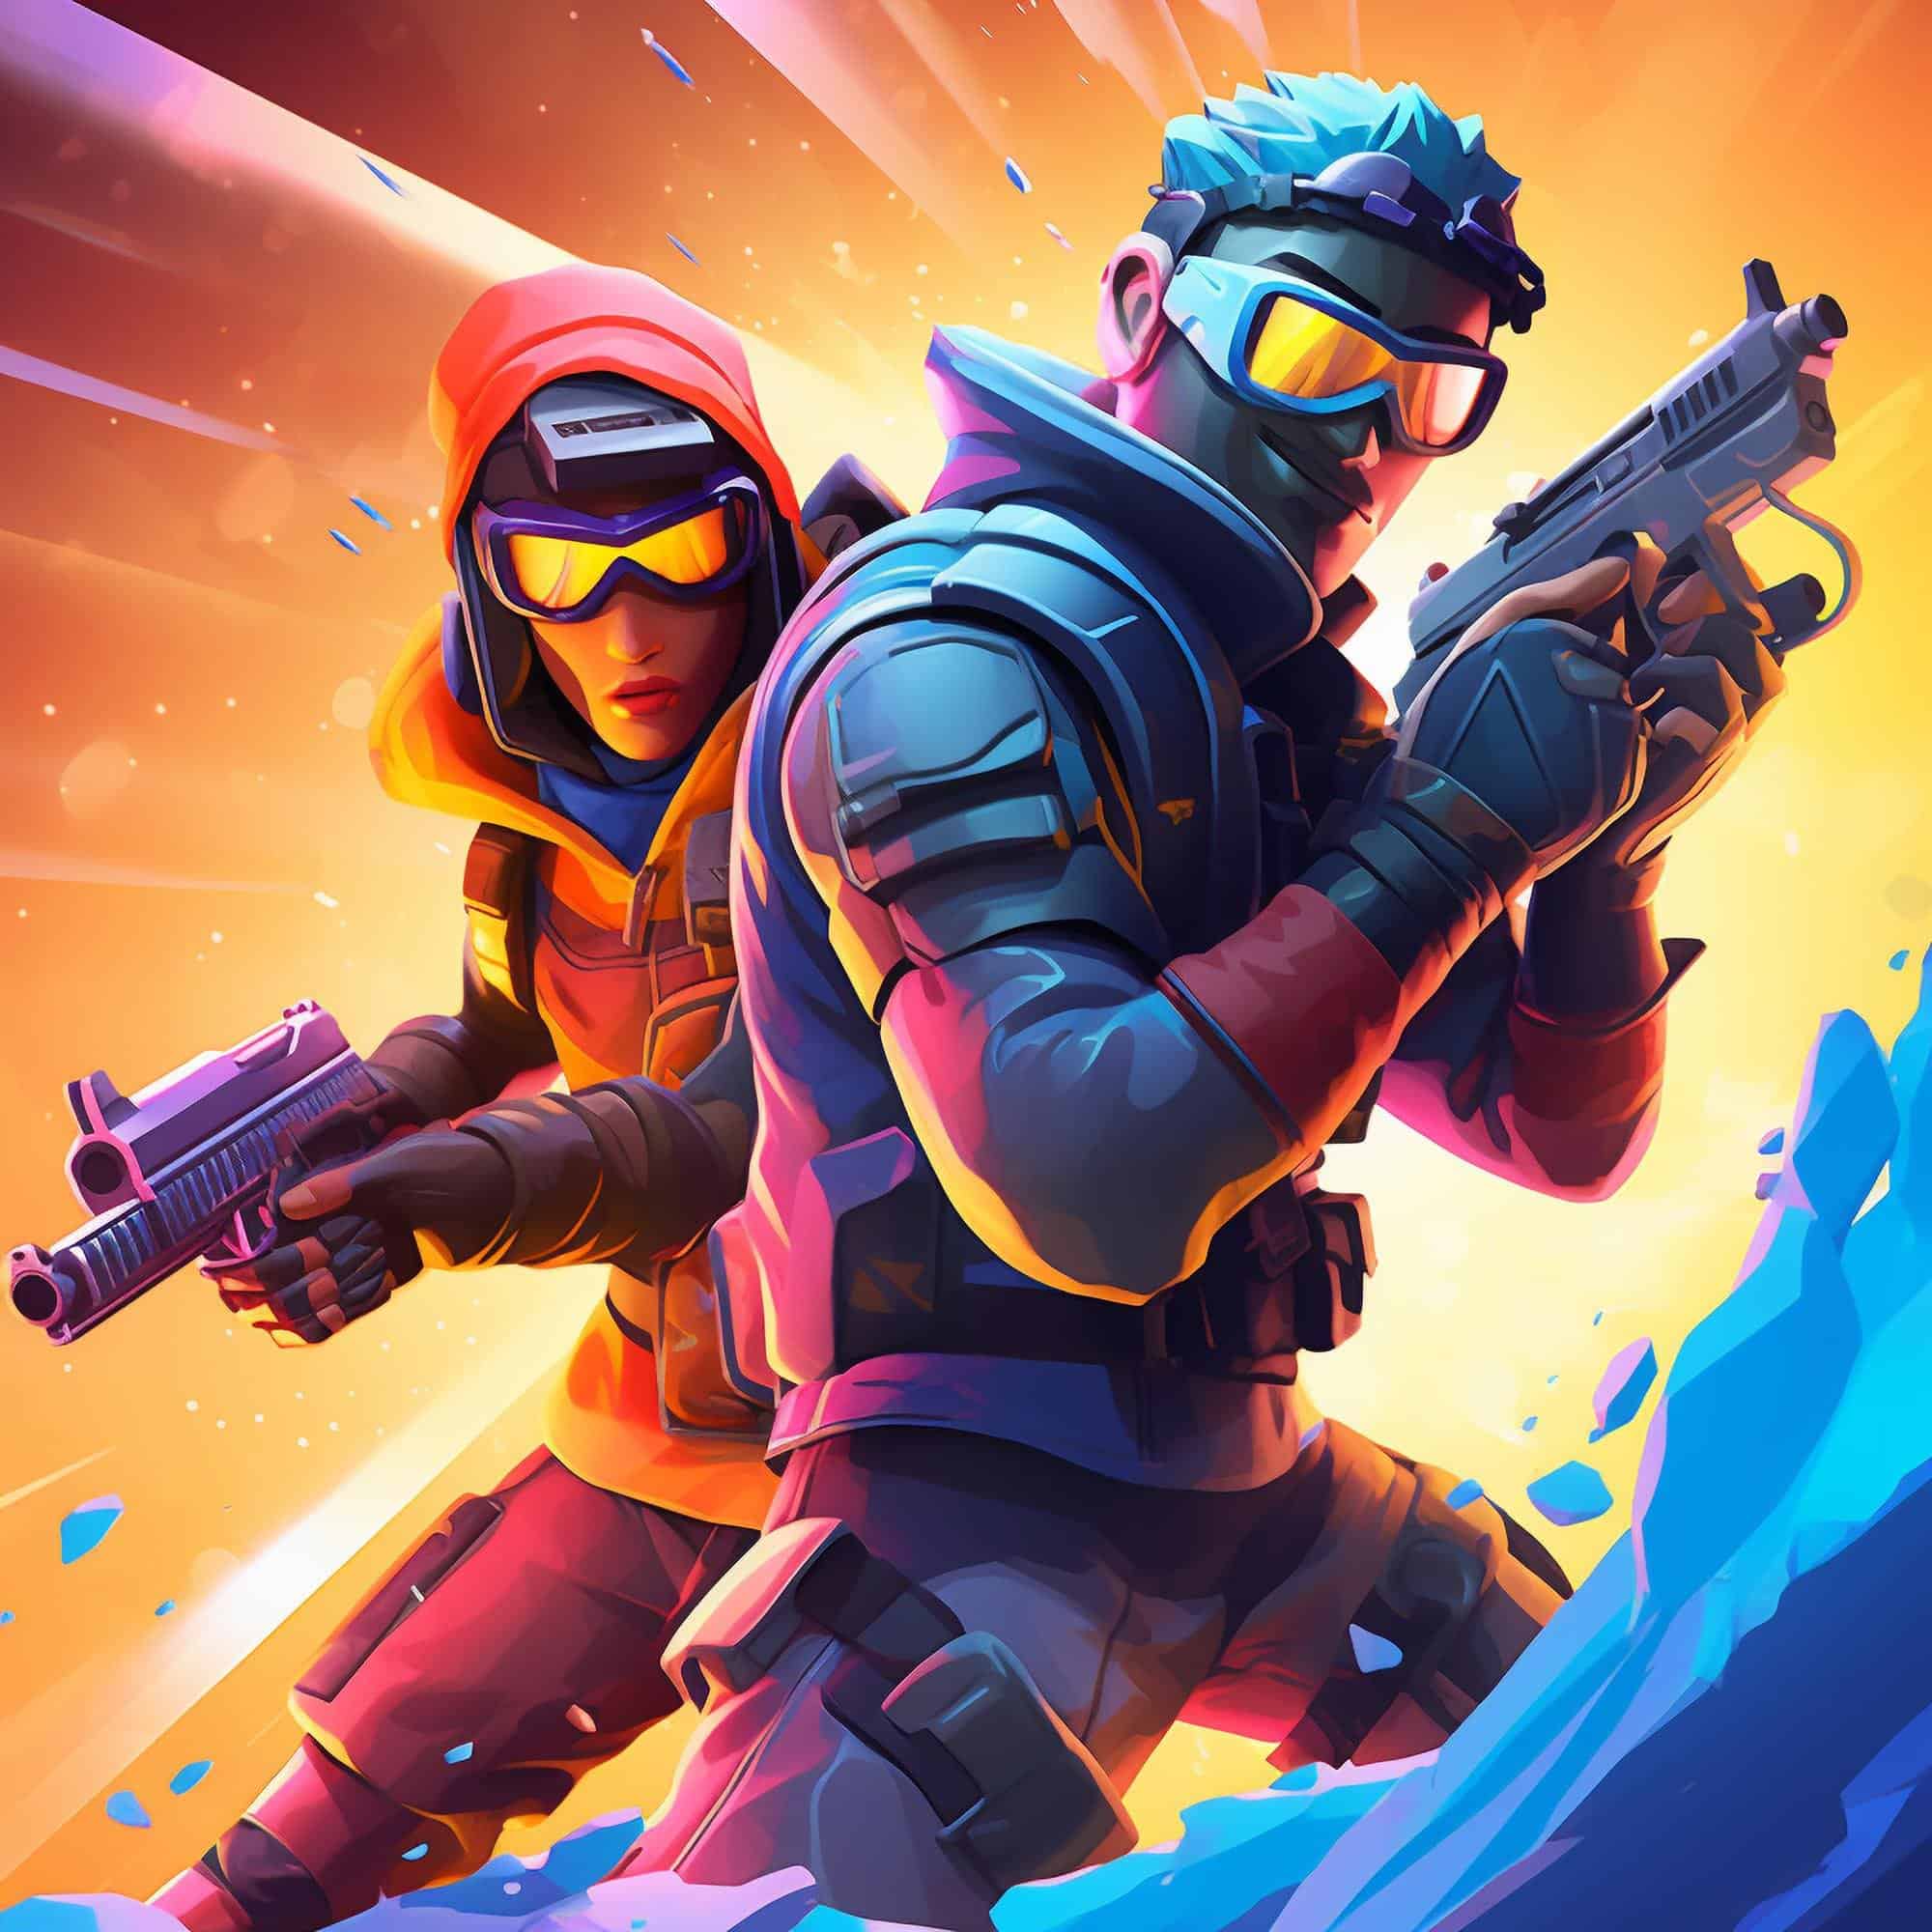 From Zero to Hero: Fortnite Battle Royale Strategy for Newbies